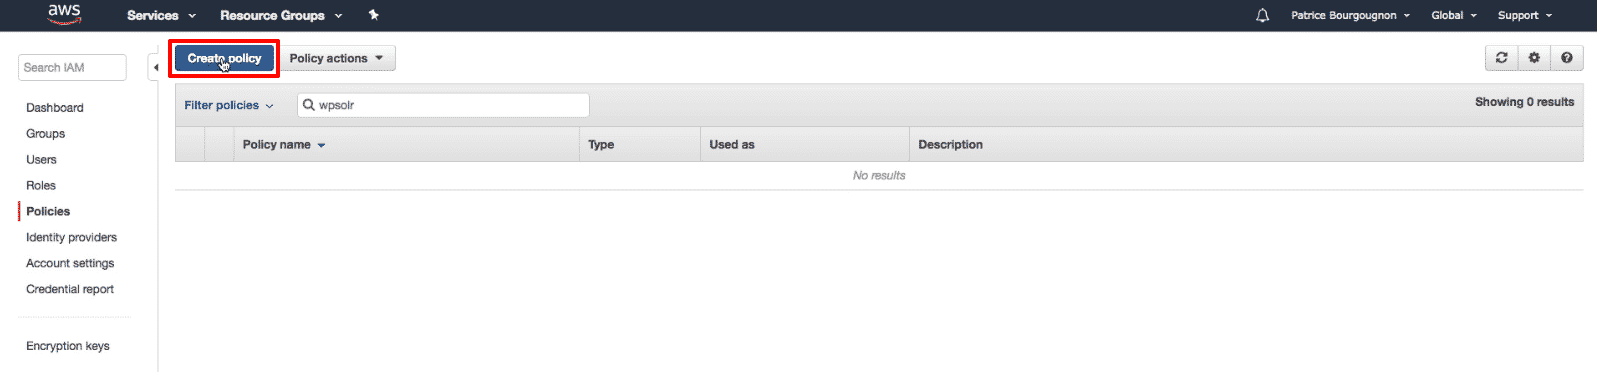 Image wpsolr-amazon-cluster-button-new-policy.png of Create an Amazon AWS OpenSearch index